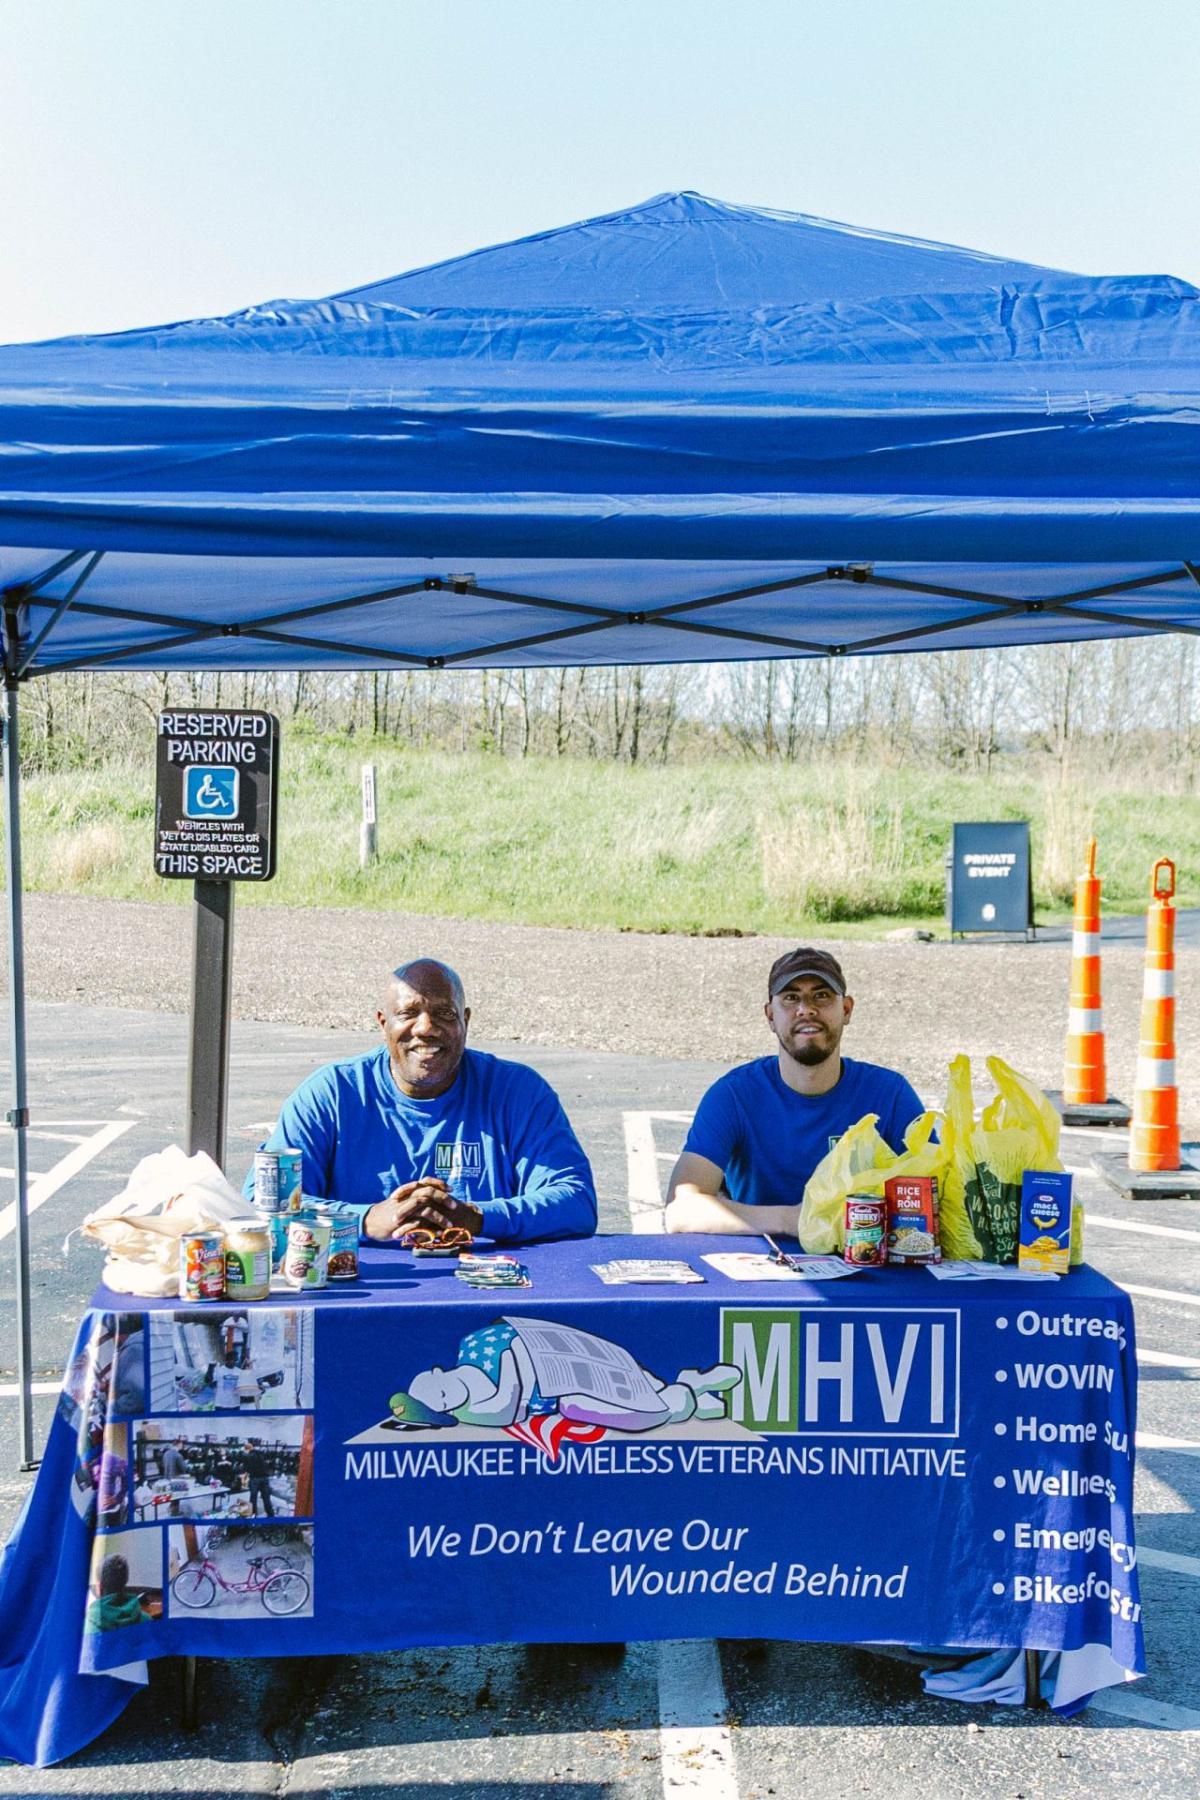 People seated at a booth "MHVI"